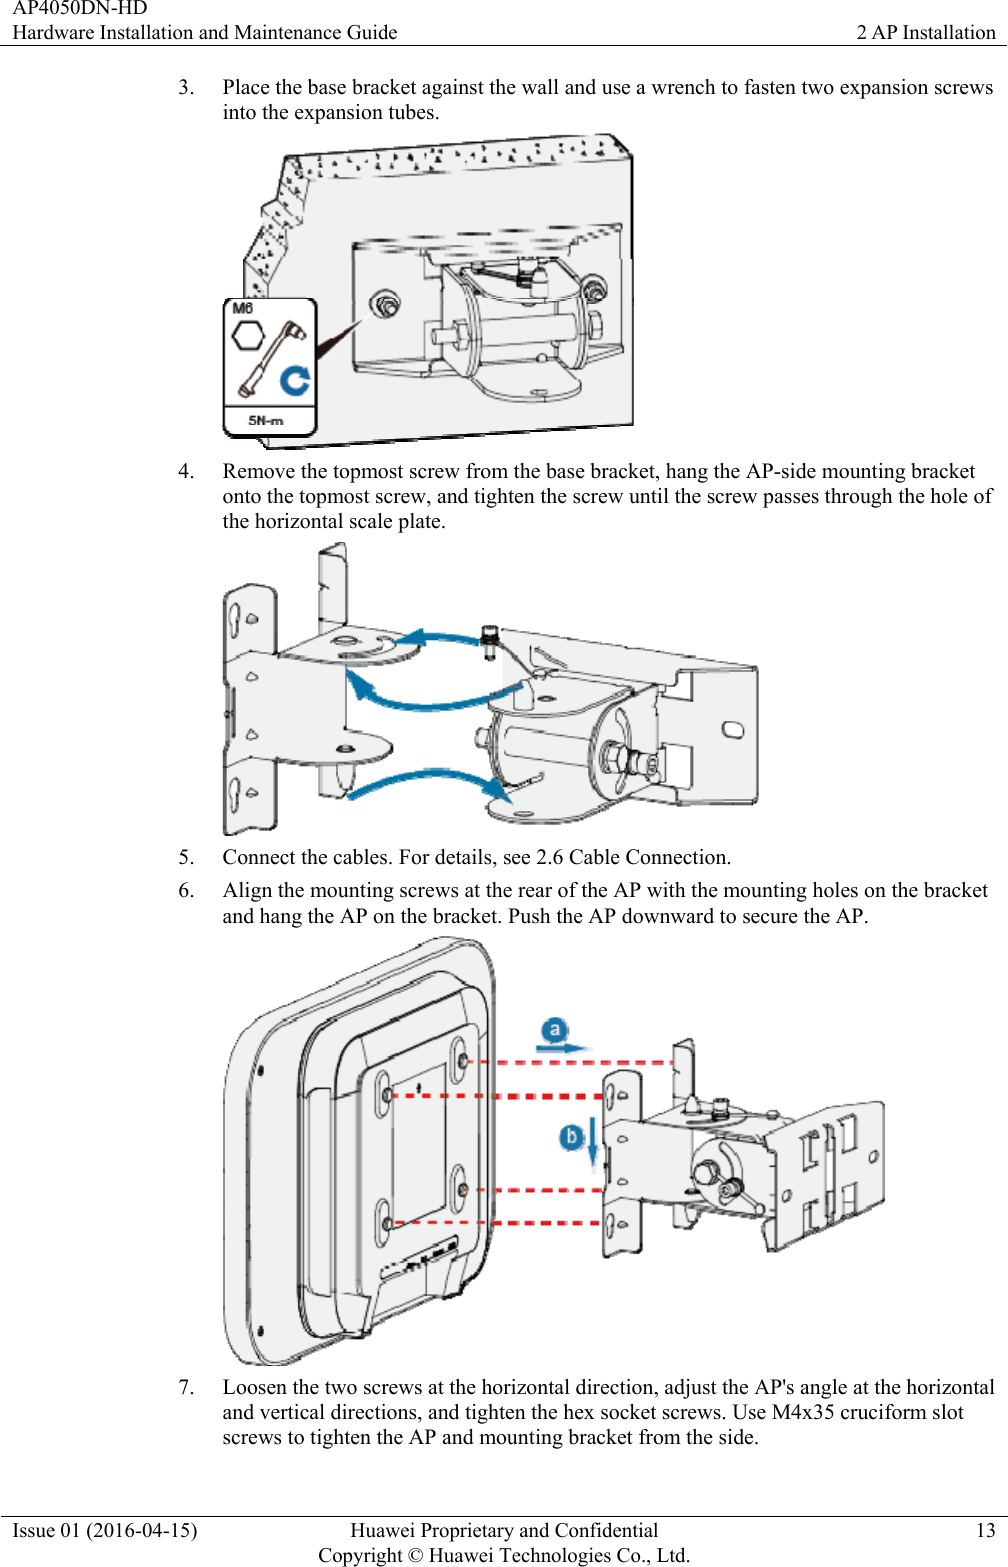 AP4050DN-HD Hardware Installation and Maintenance Guide  2 AP Installation Issue 01 (2016-04-15)  Huawei Proprietary and Confidential         Copyright © Huawei Technologies Co., Ltd.13 3. Place the base bracket against the wall and use a wrench to fasten two expansion screws into the expansion tubes.  4. Remove the topmost screw from the base bracket, hang the AP-side mounting bracket onto the topmost screw, and tighten the screw until the screw passes through the hole of the horizontal scale plate.  5. Connect the cables. For details, see 2.6 Cable Connection. 6. Align the mounting screws at the rear of the AP with the mounting holes on the bracket and hang the AP on the bracket. Push the AP downward to secure the AP.  7. Loosen the two screws at the horizontal direction, adjust the AP&apos;s angle at the horizontal and vertical directions, and tighten the hex socket screws. Use M4x35 cruciform slot screws to tighten the AP and mounting bracket from the side. 